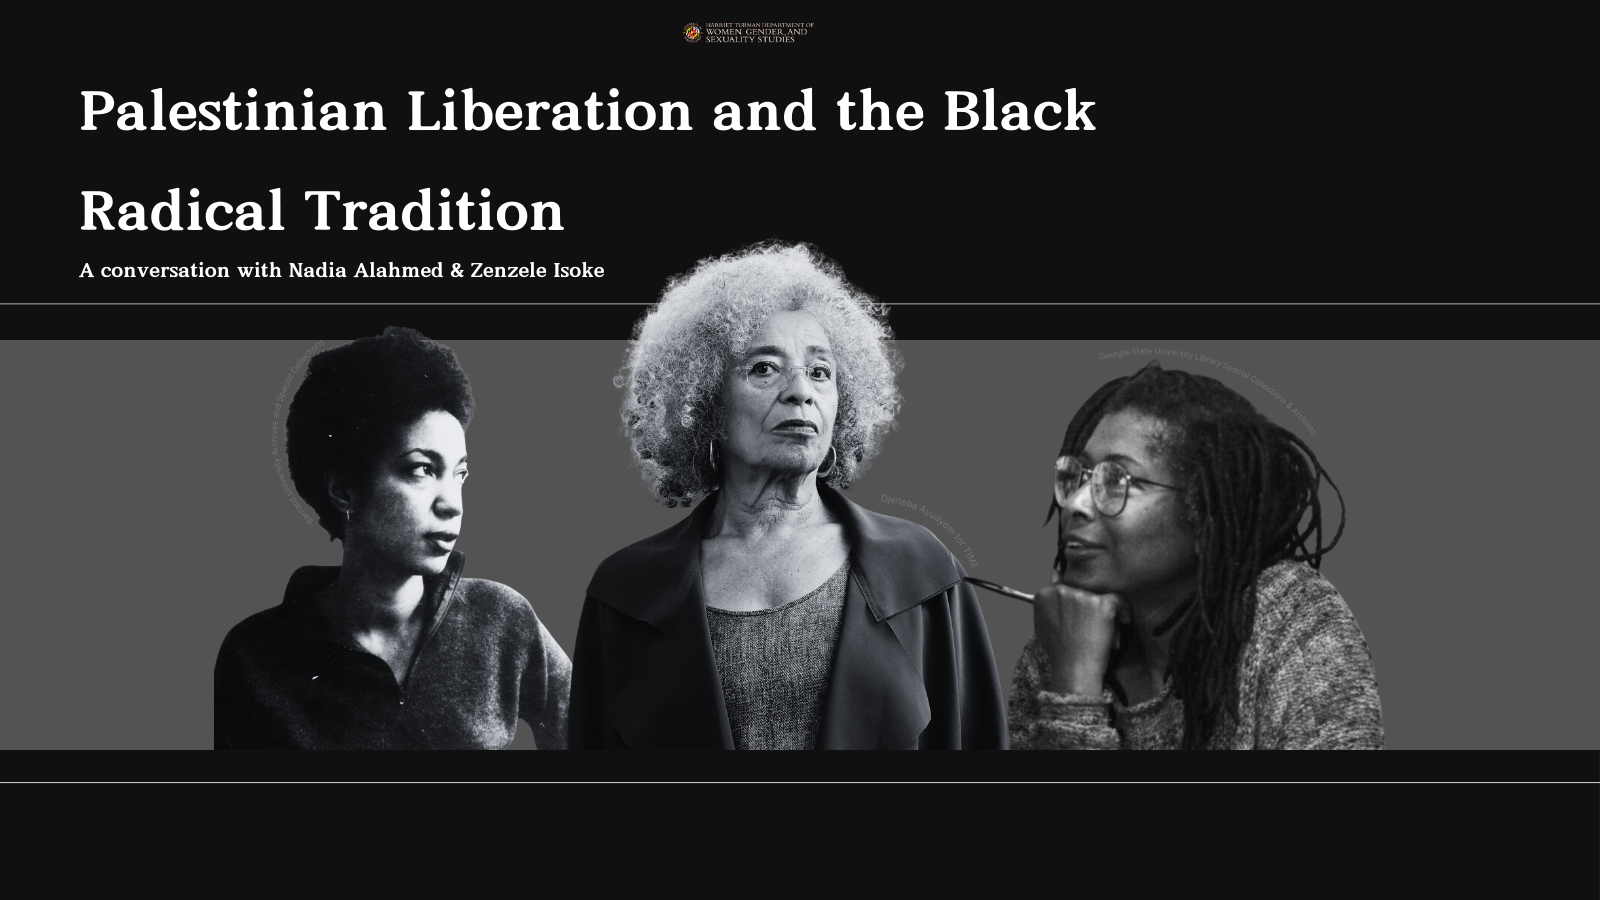 Black and white images of June Jordan, Angela Davis, and Alice Walker beneath the title of the talk